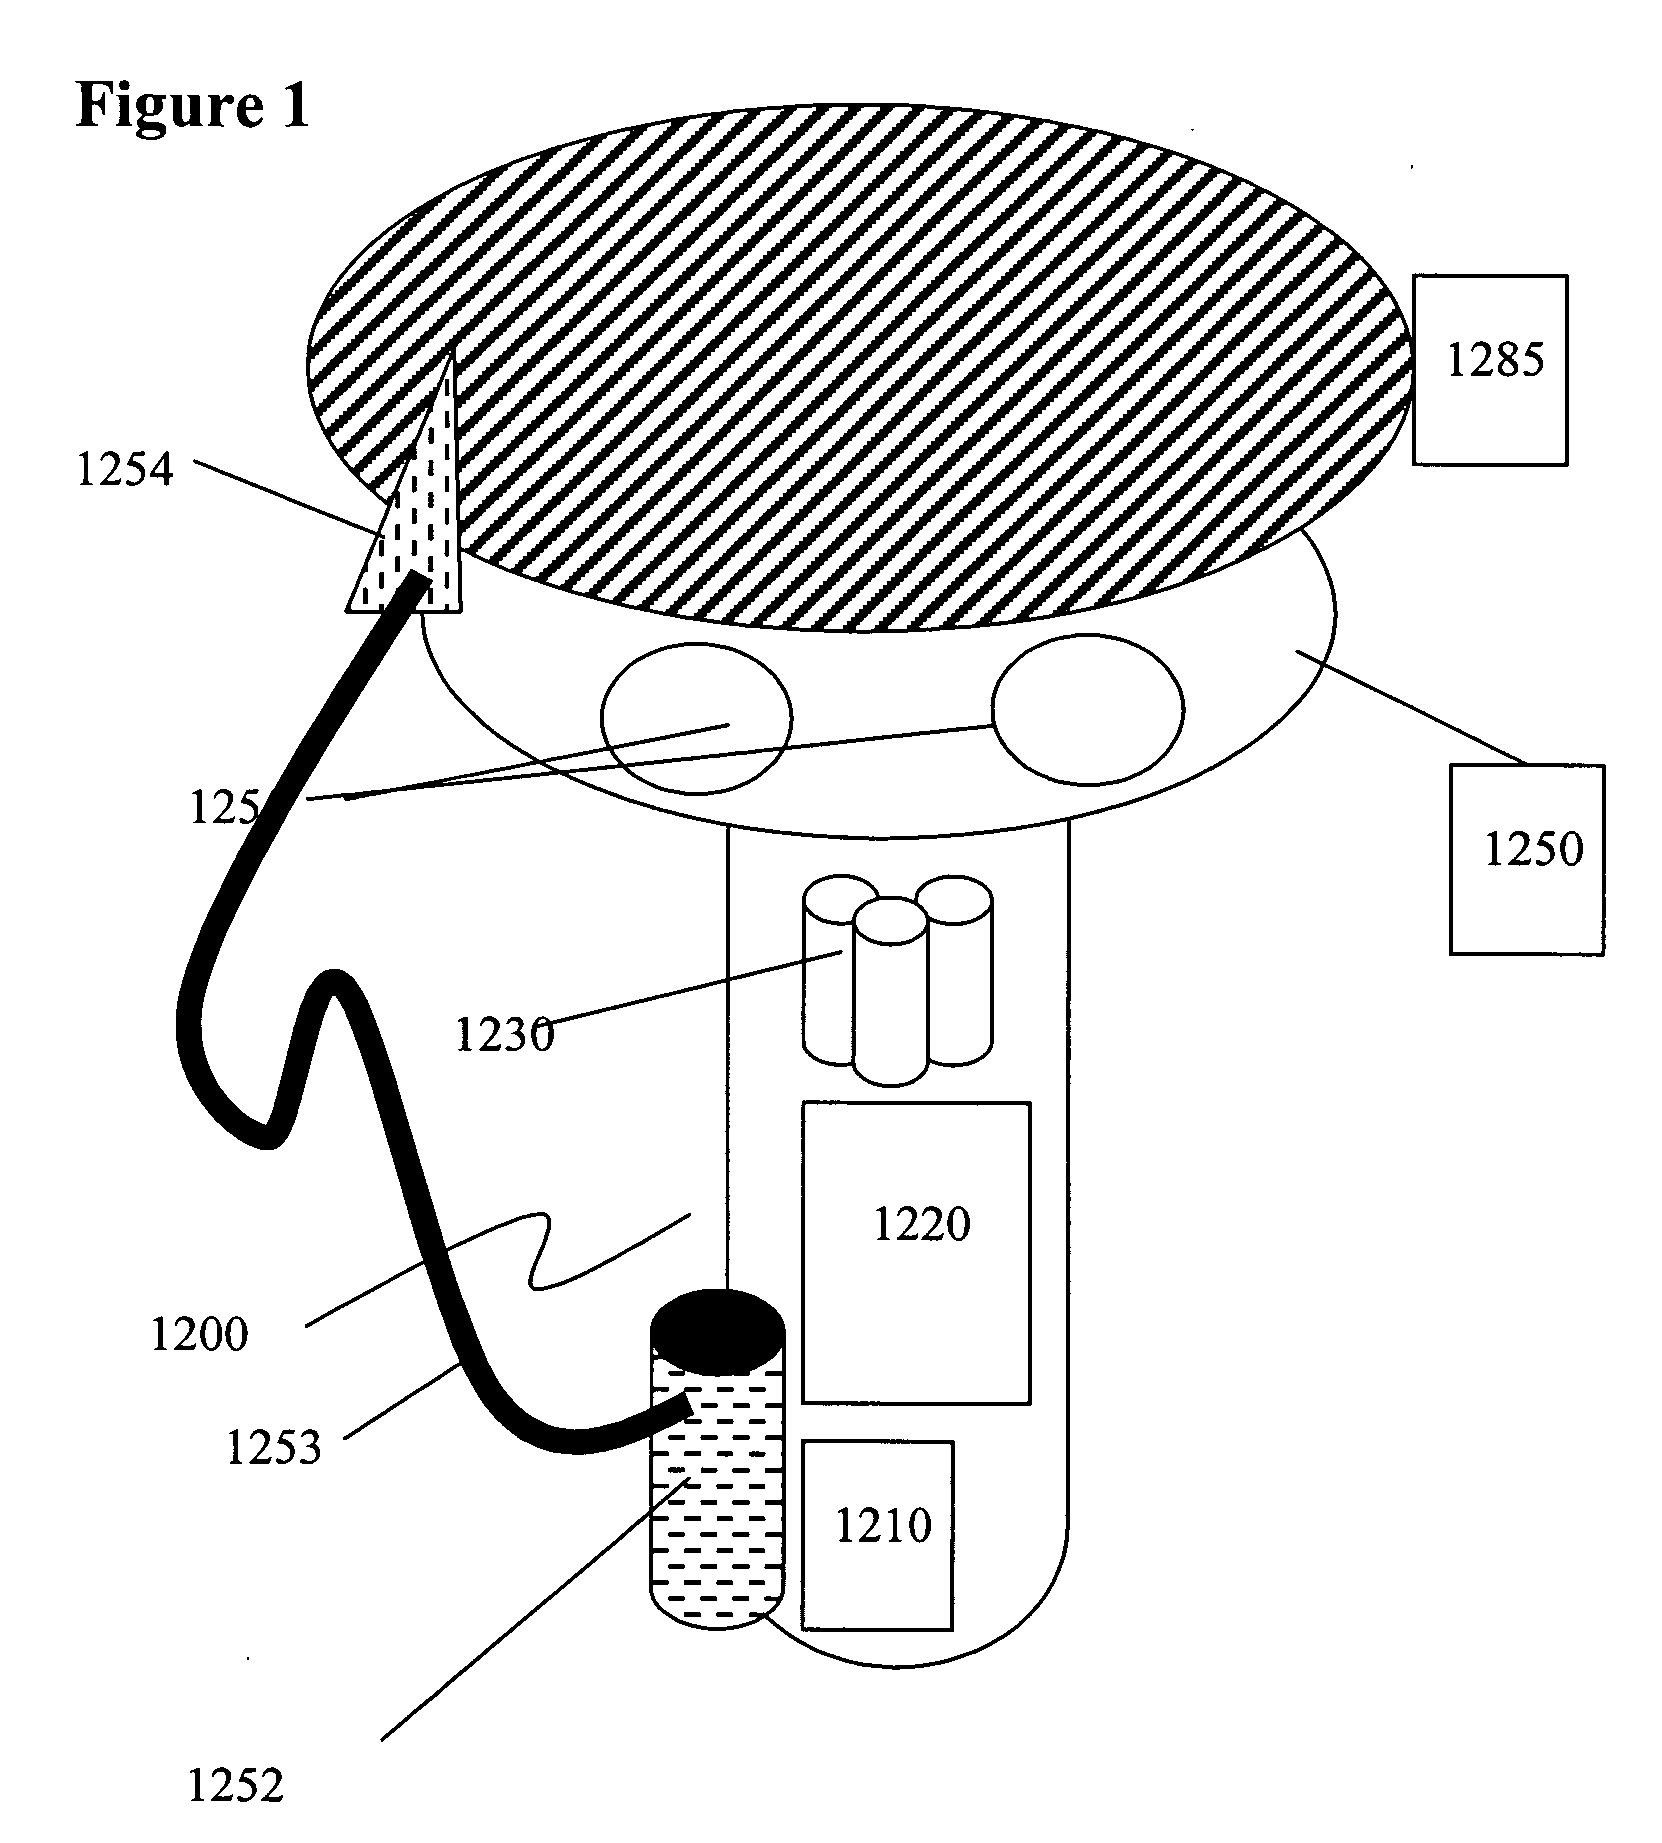 Device and method for treating skin disorders with thermal energy